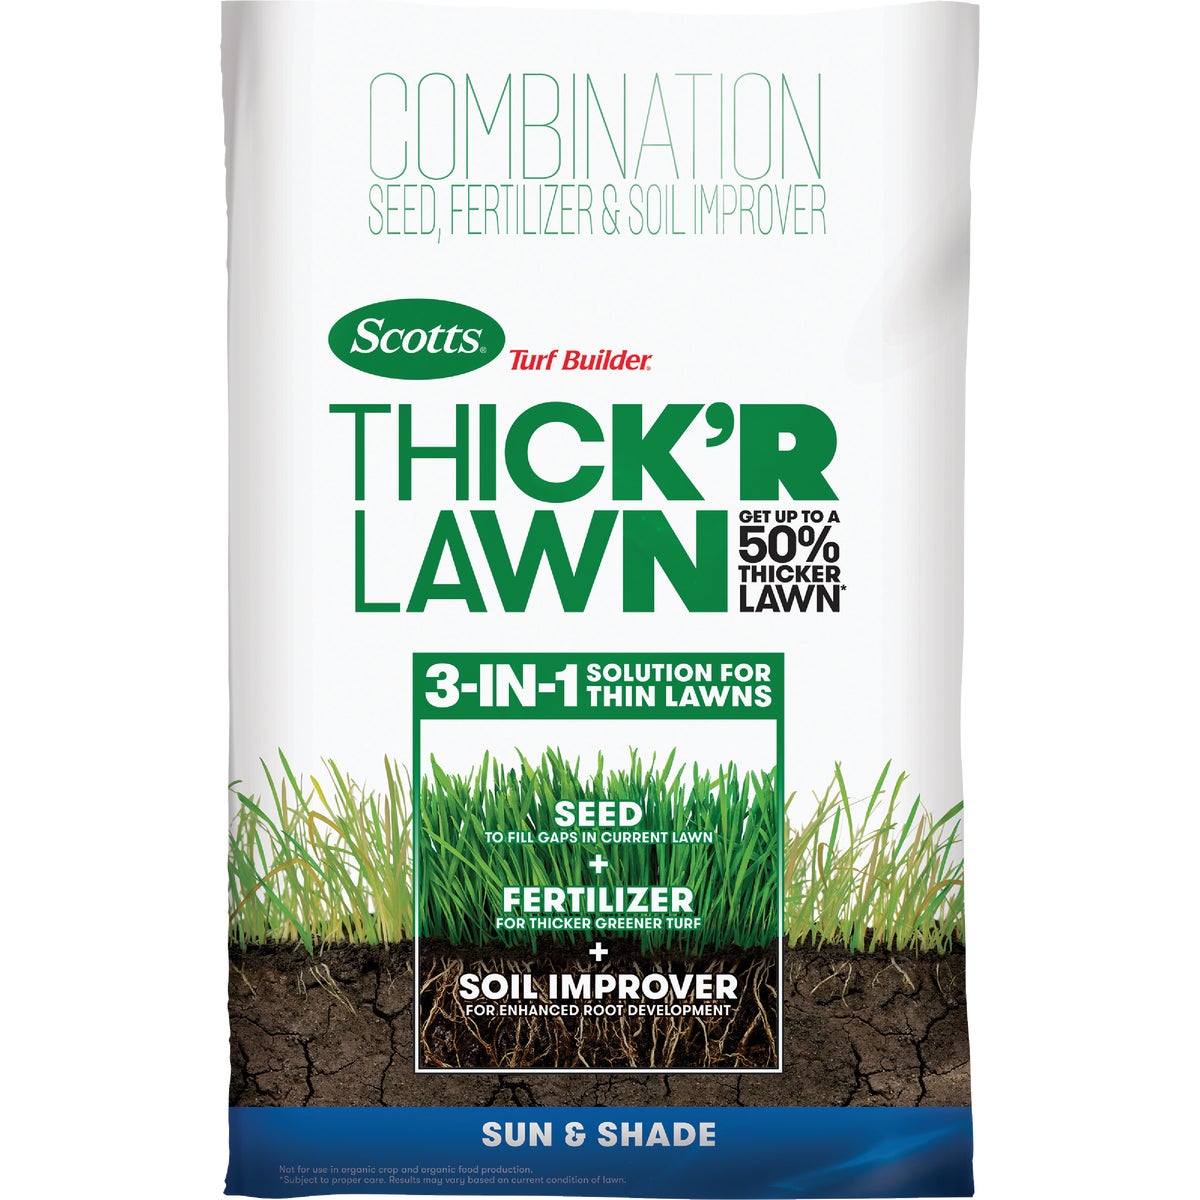 Scotts Turf Builder Thick'R Lawn 12 Lb. 1200 Sq. Ft. Coverage Combination Sun & Shade Grass Seed, Fertilizer, & Soil Improver